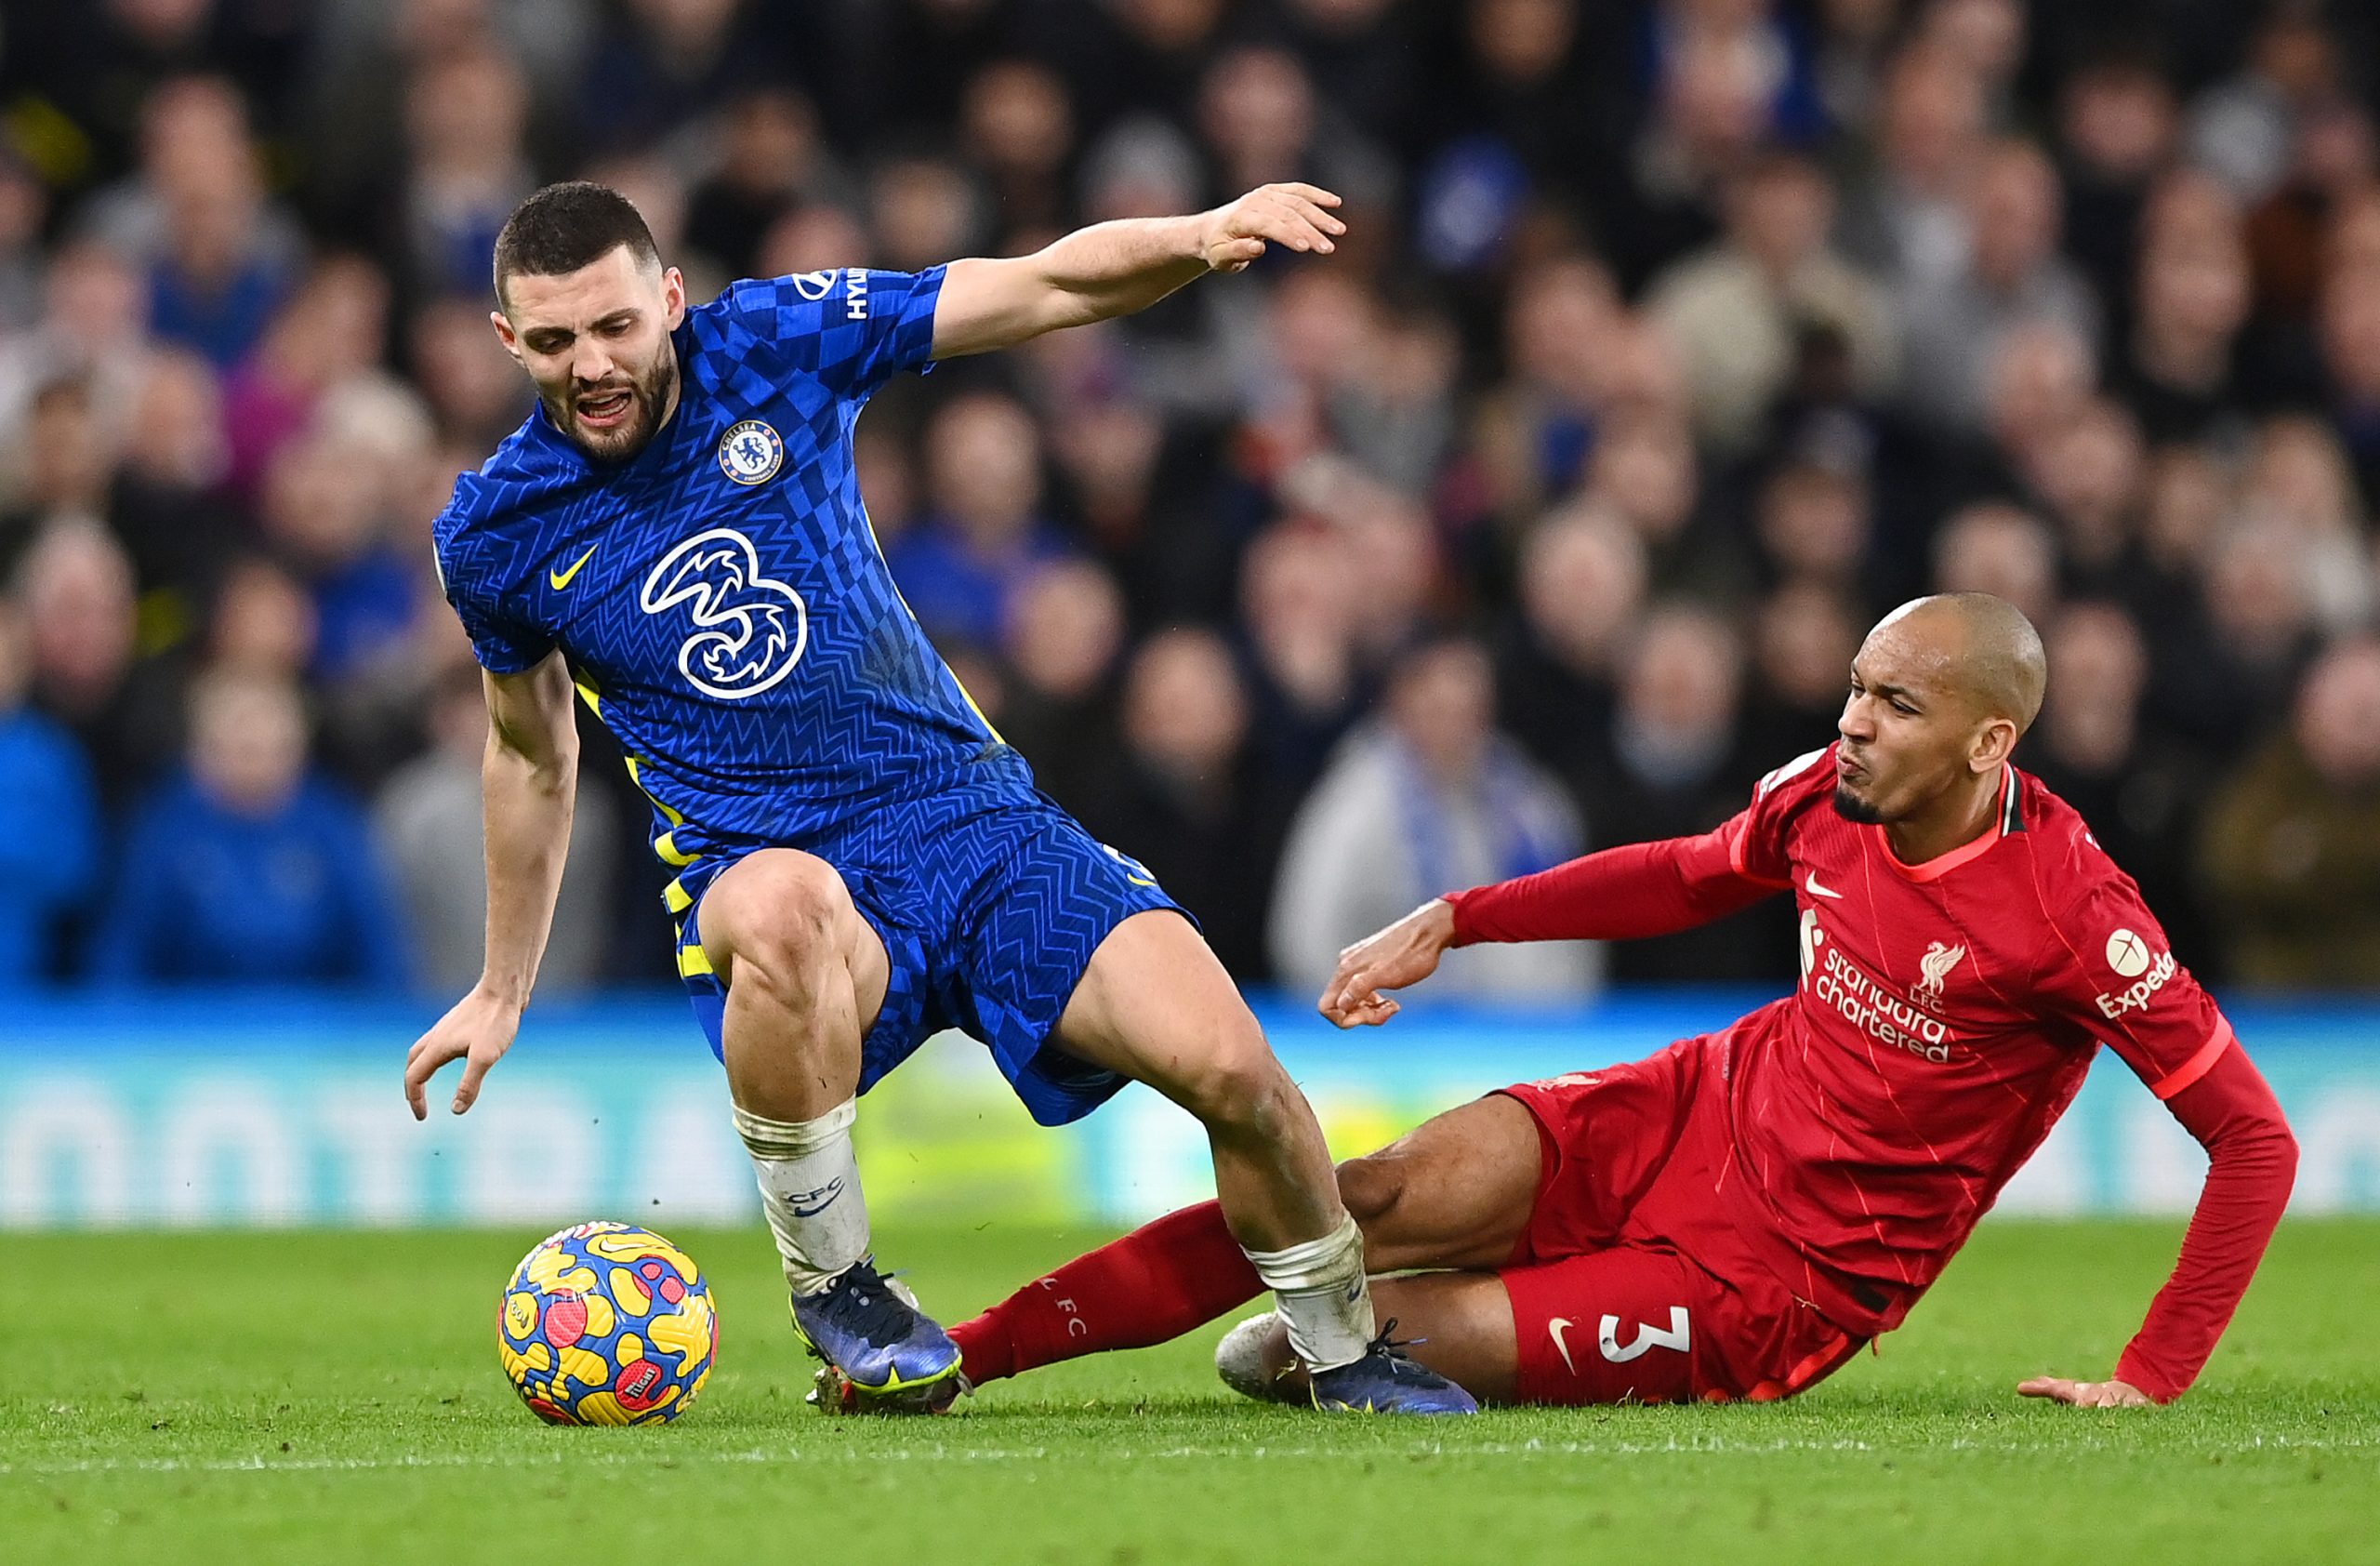 Mateo Kovacic in action against Fabinho of Liverpool. (Photo by Shaun Botterill/Getty Images)